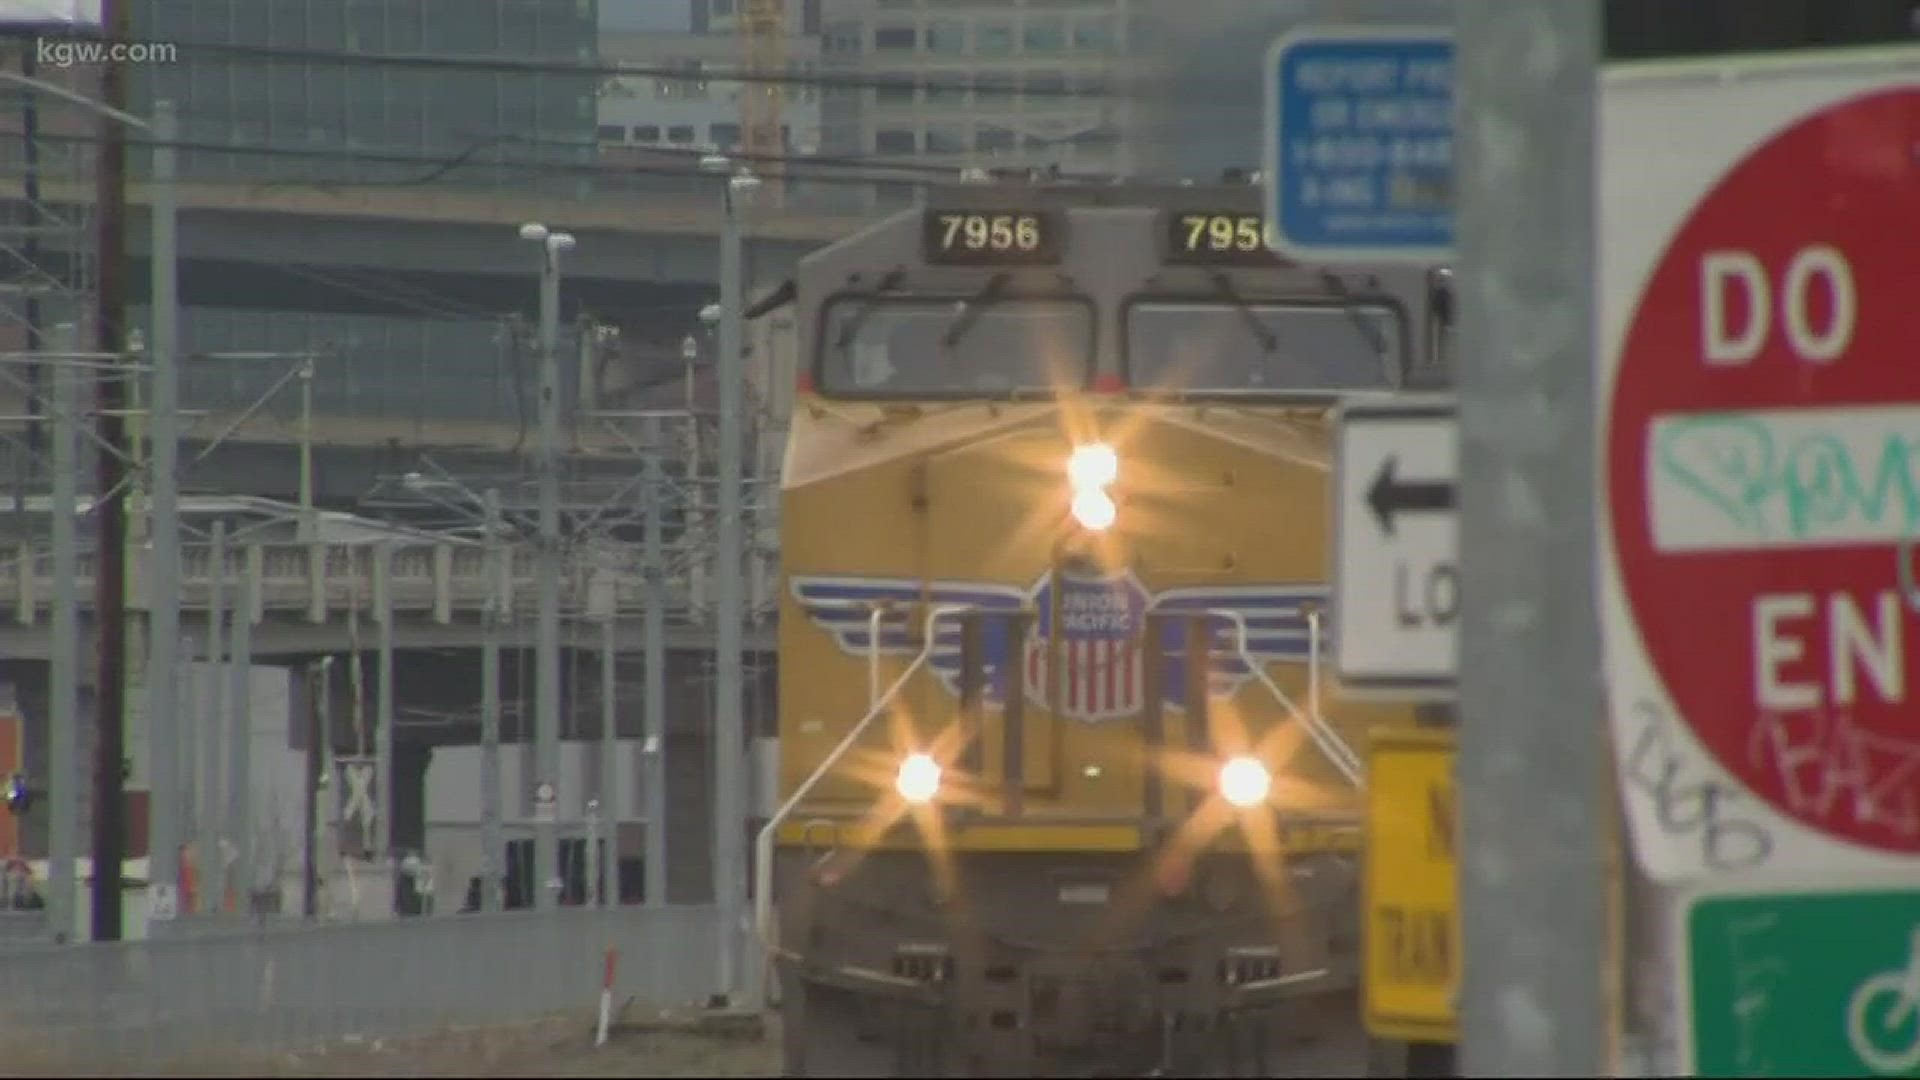 Union Pacific is cracking down on violators.